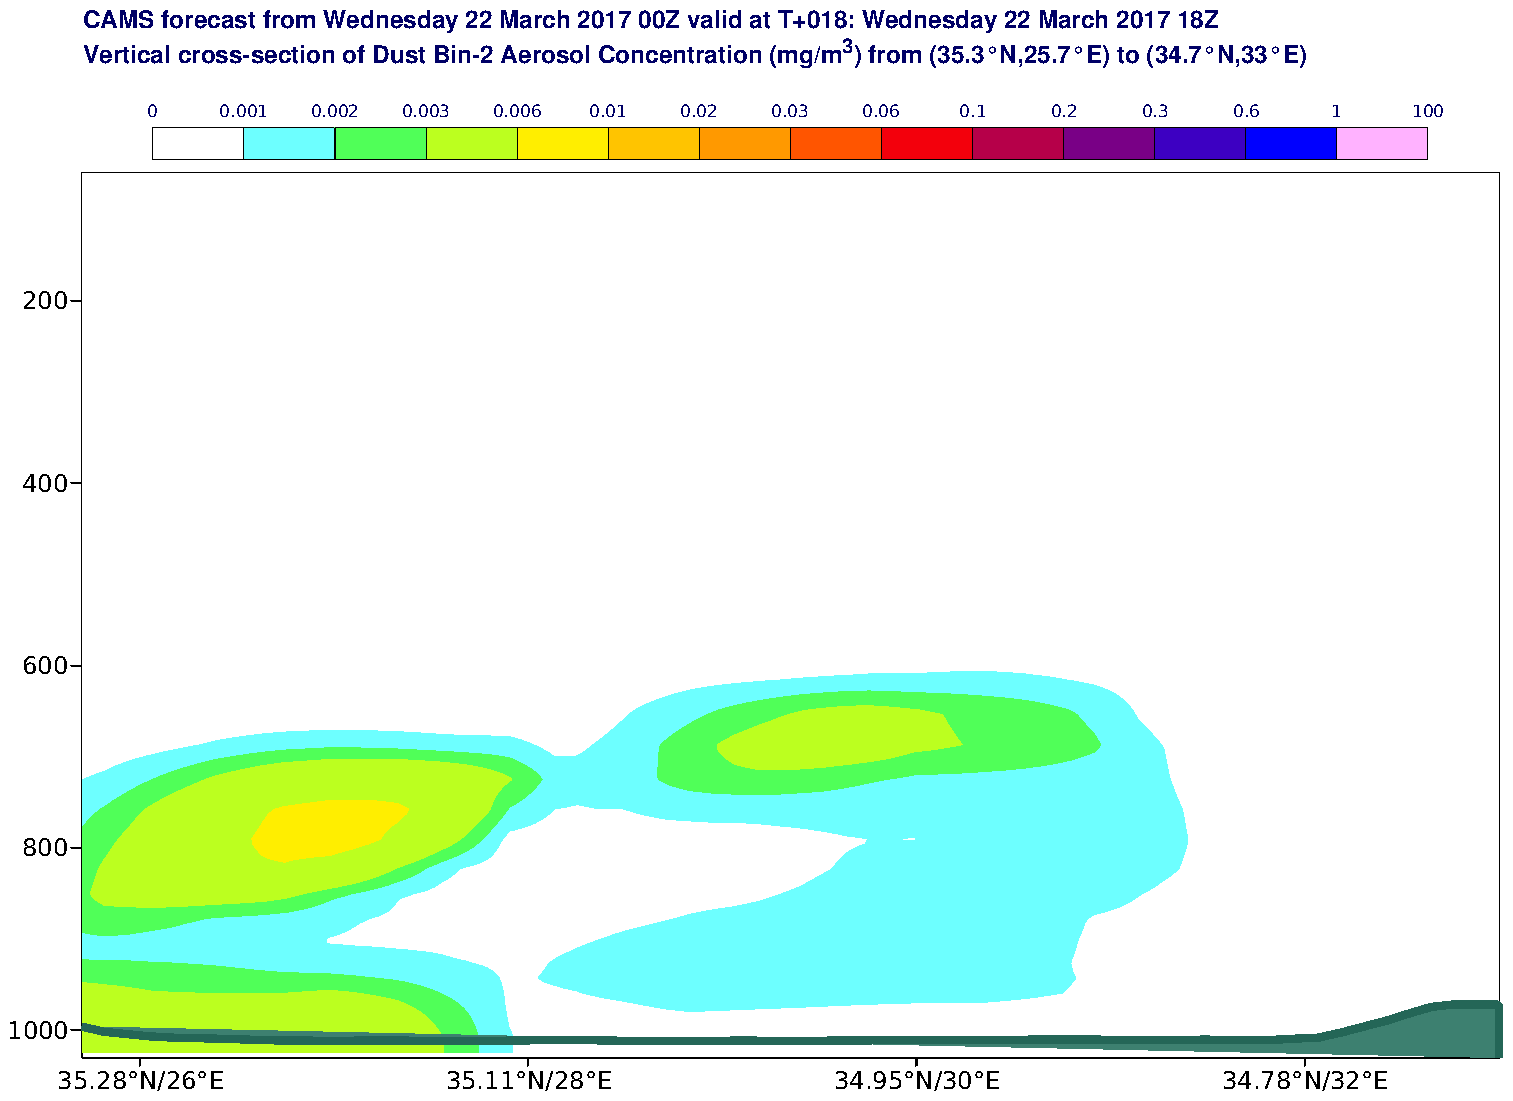 Vertical cross-section of Dust Bin-2 Aerosol Concentration (mg/m3) valid at T18 - 2017-03-22 18:00